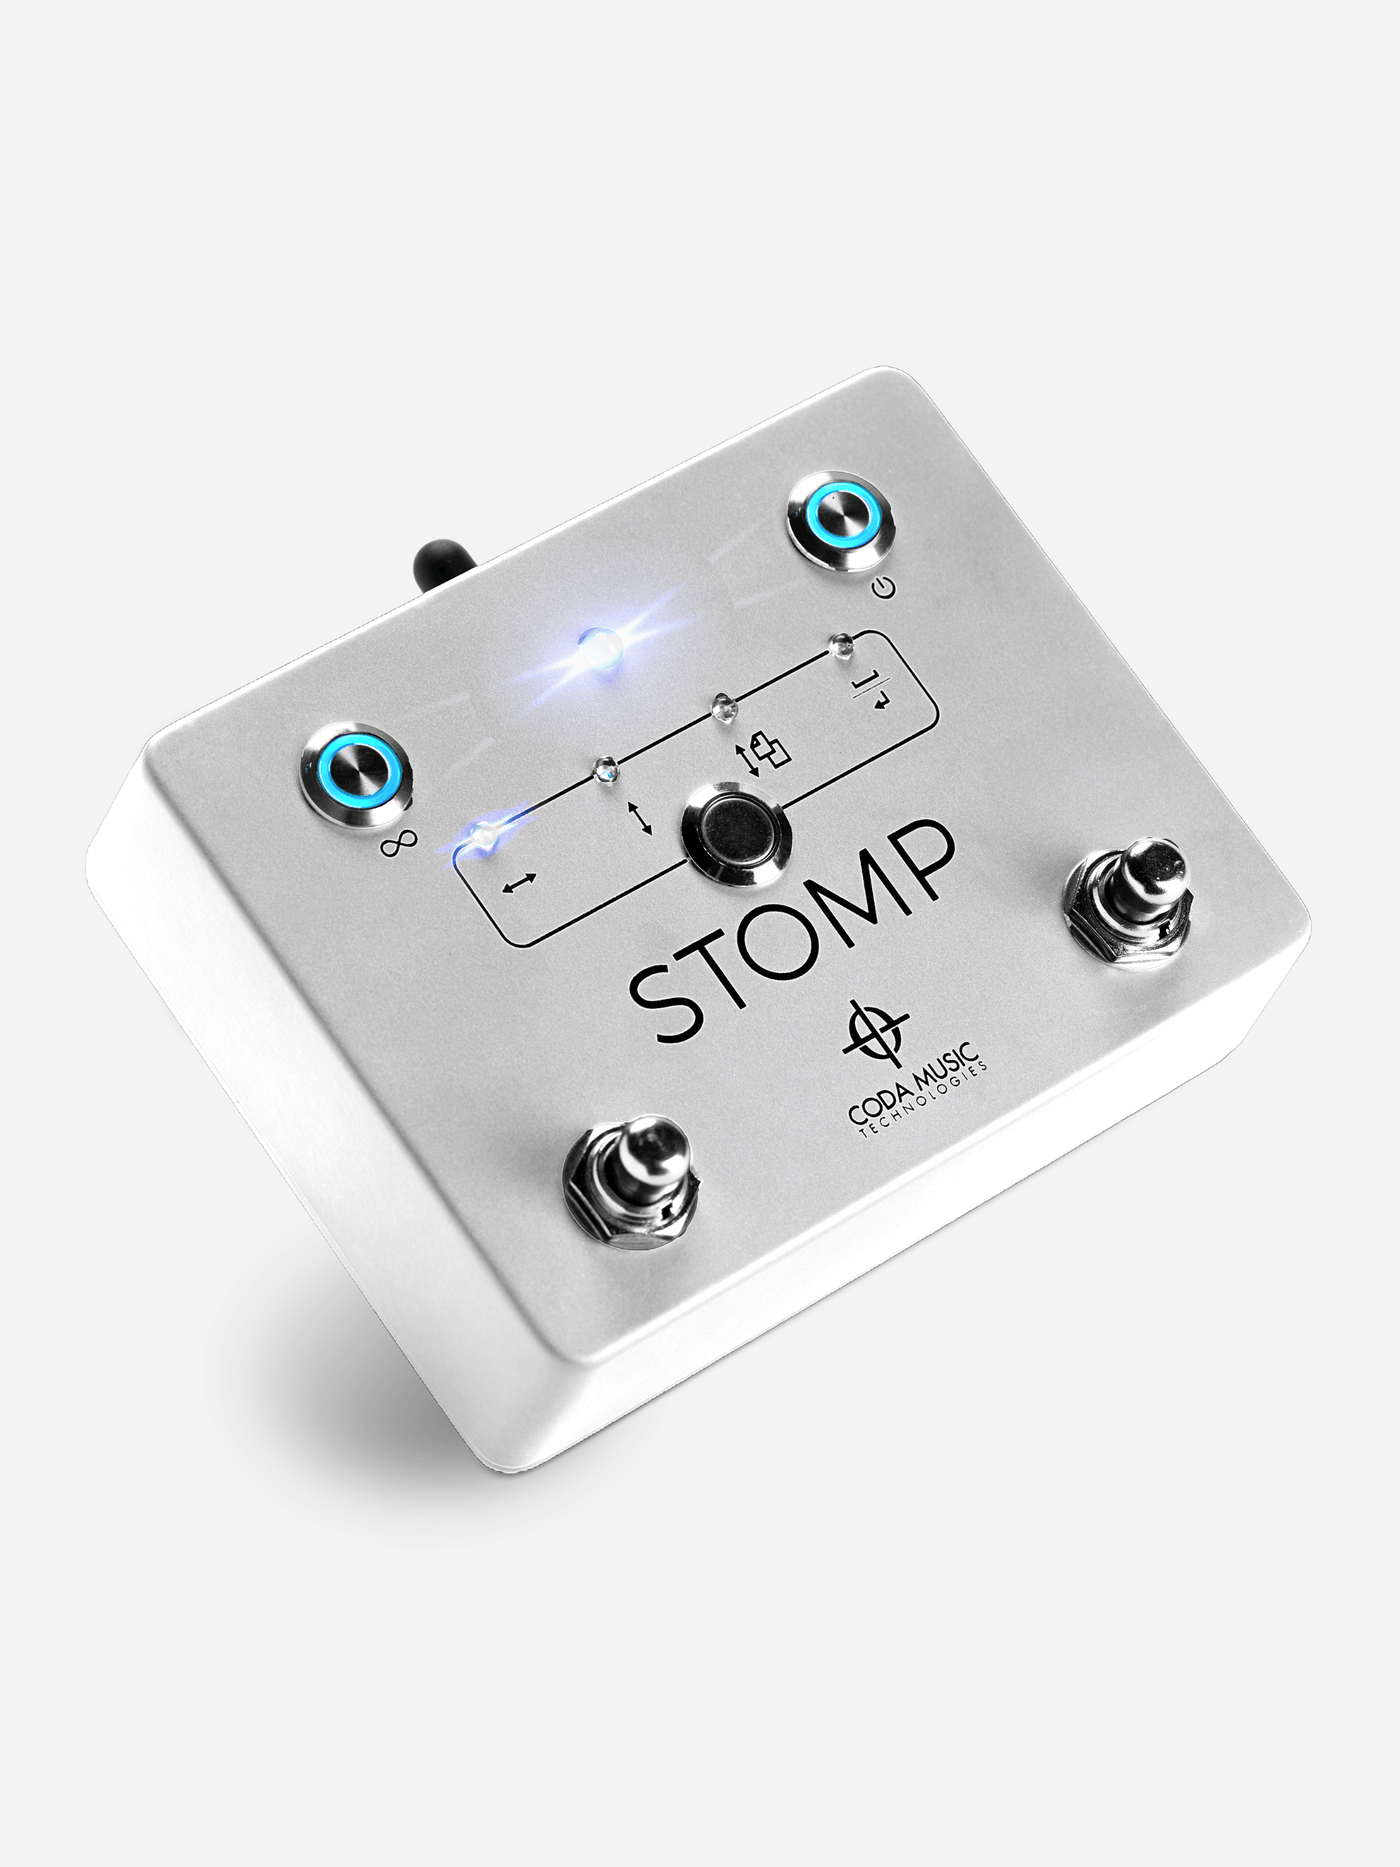 STOMP Bluetooth® 4.0 Page Turner Pedal & App Controller